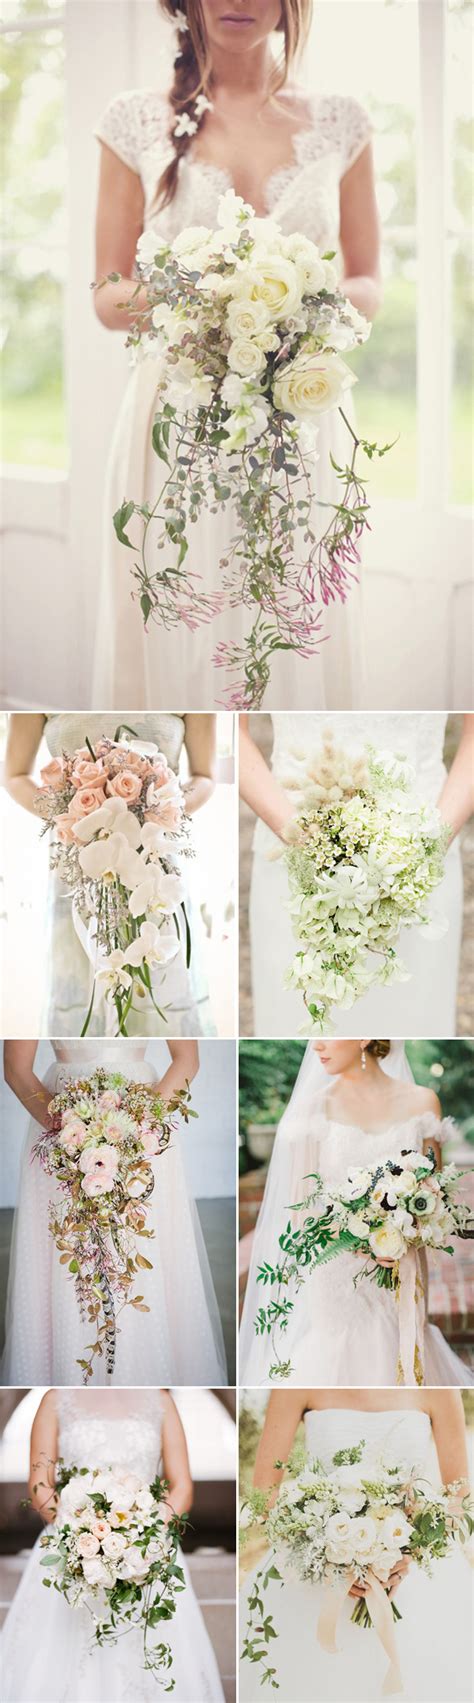 72 Gorgeous Ideas For Wedding Bouquets Deer Pearl Flowers